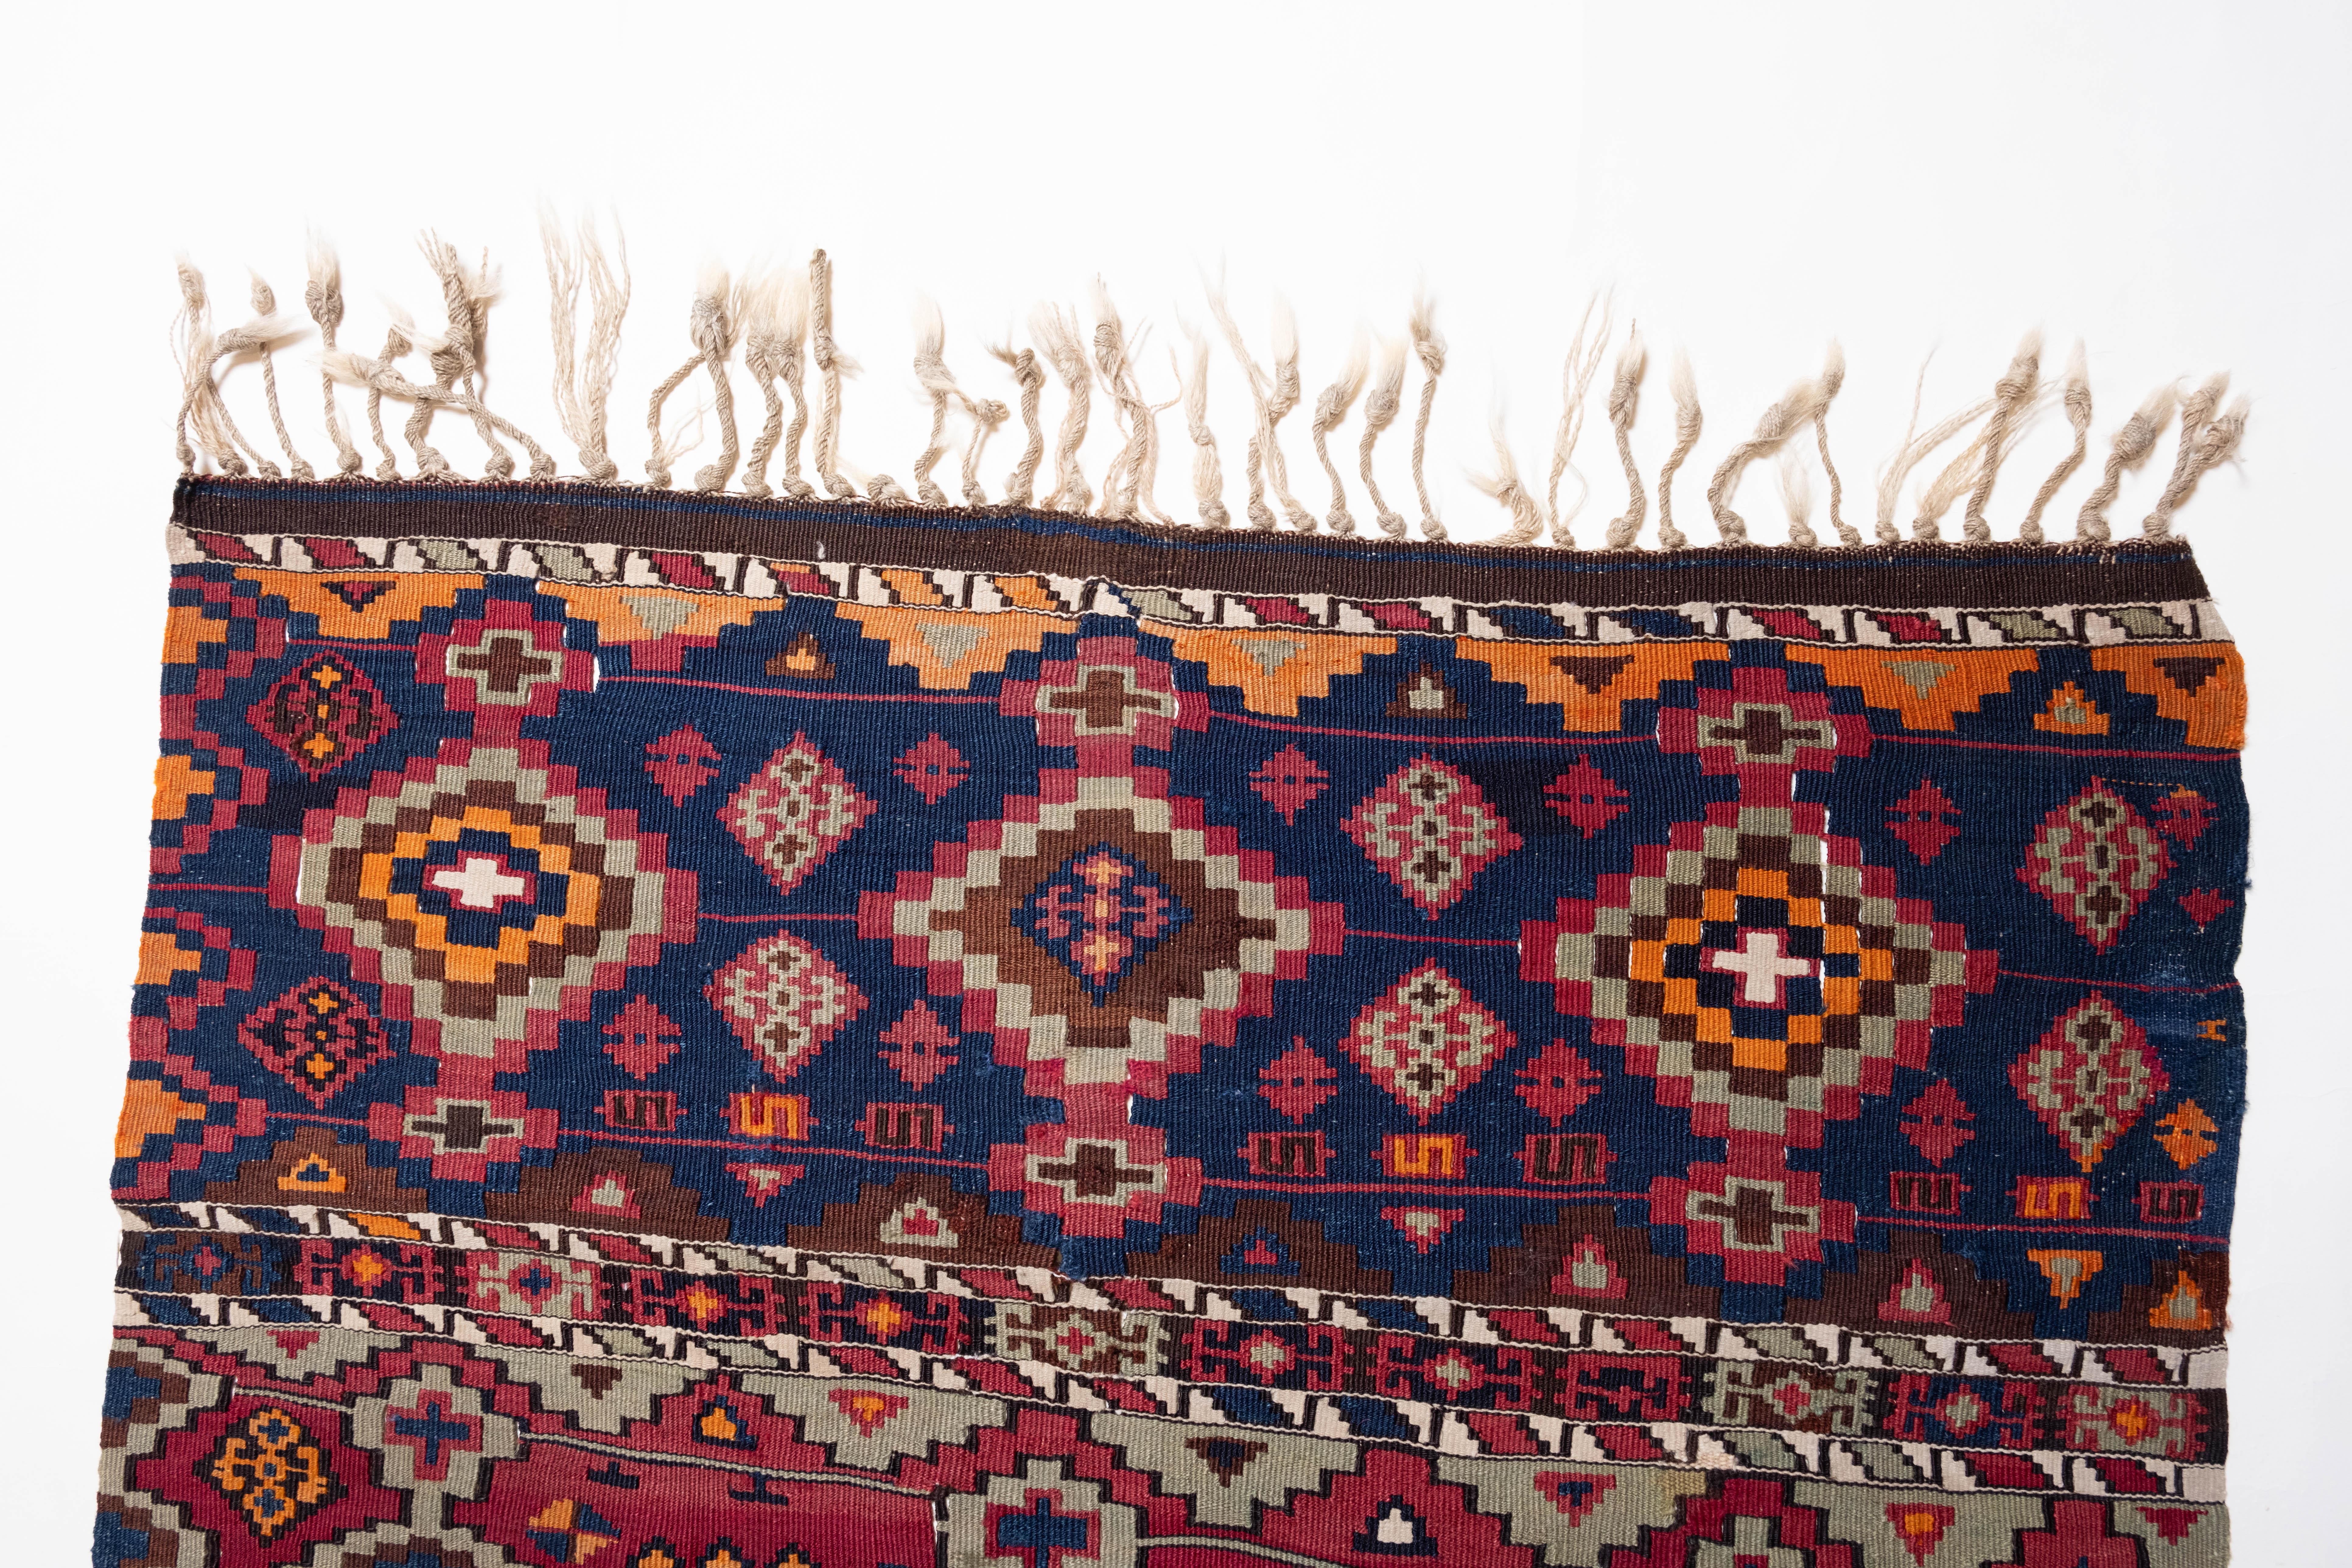 This is an Antique runner Kilim from the Aleppo region with a rare and beautiful color composition and metallic threads.

The strong colors and borderless horizontal striped design are some of the characteristics found in Malatian kilims.
Fringe